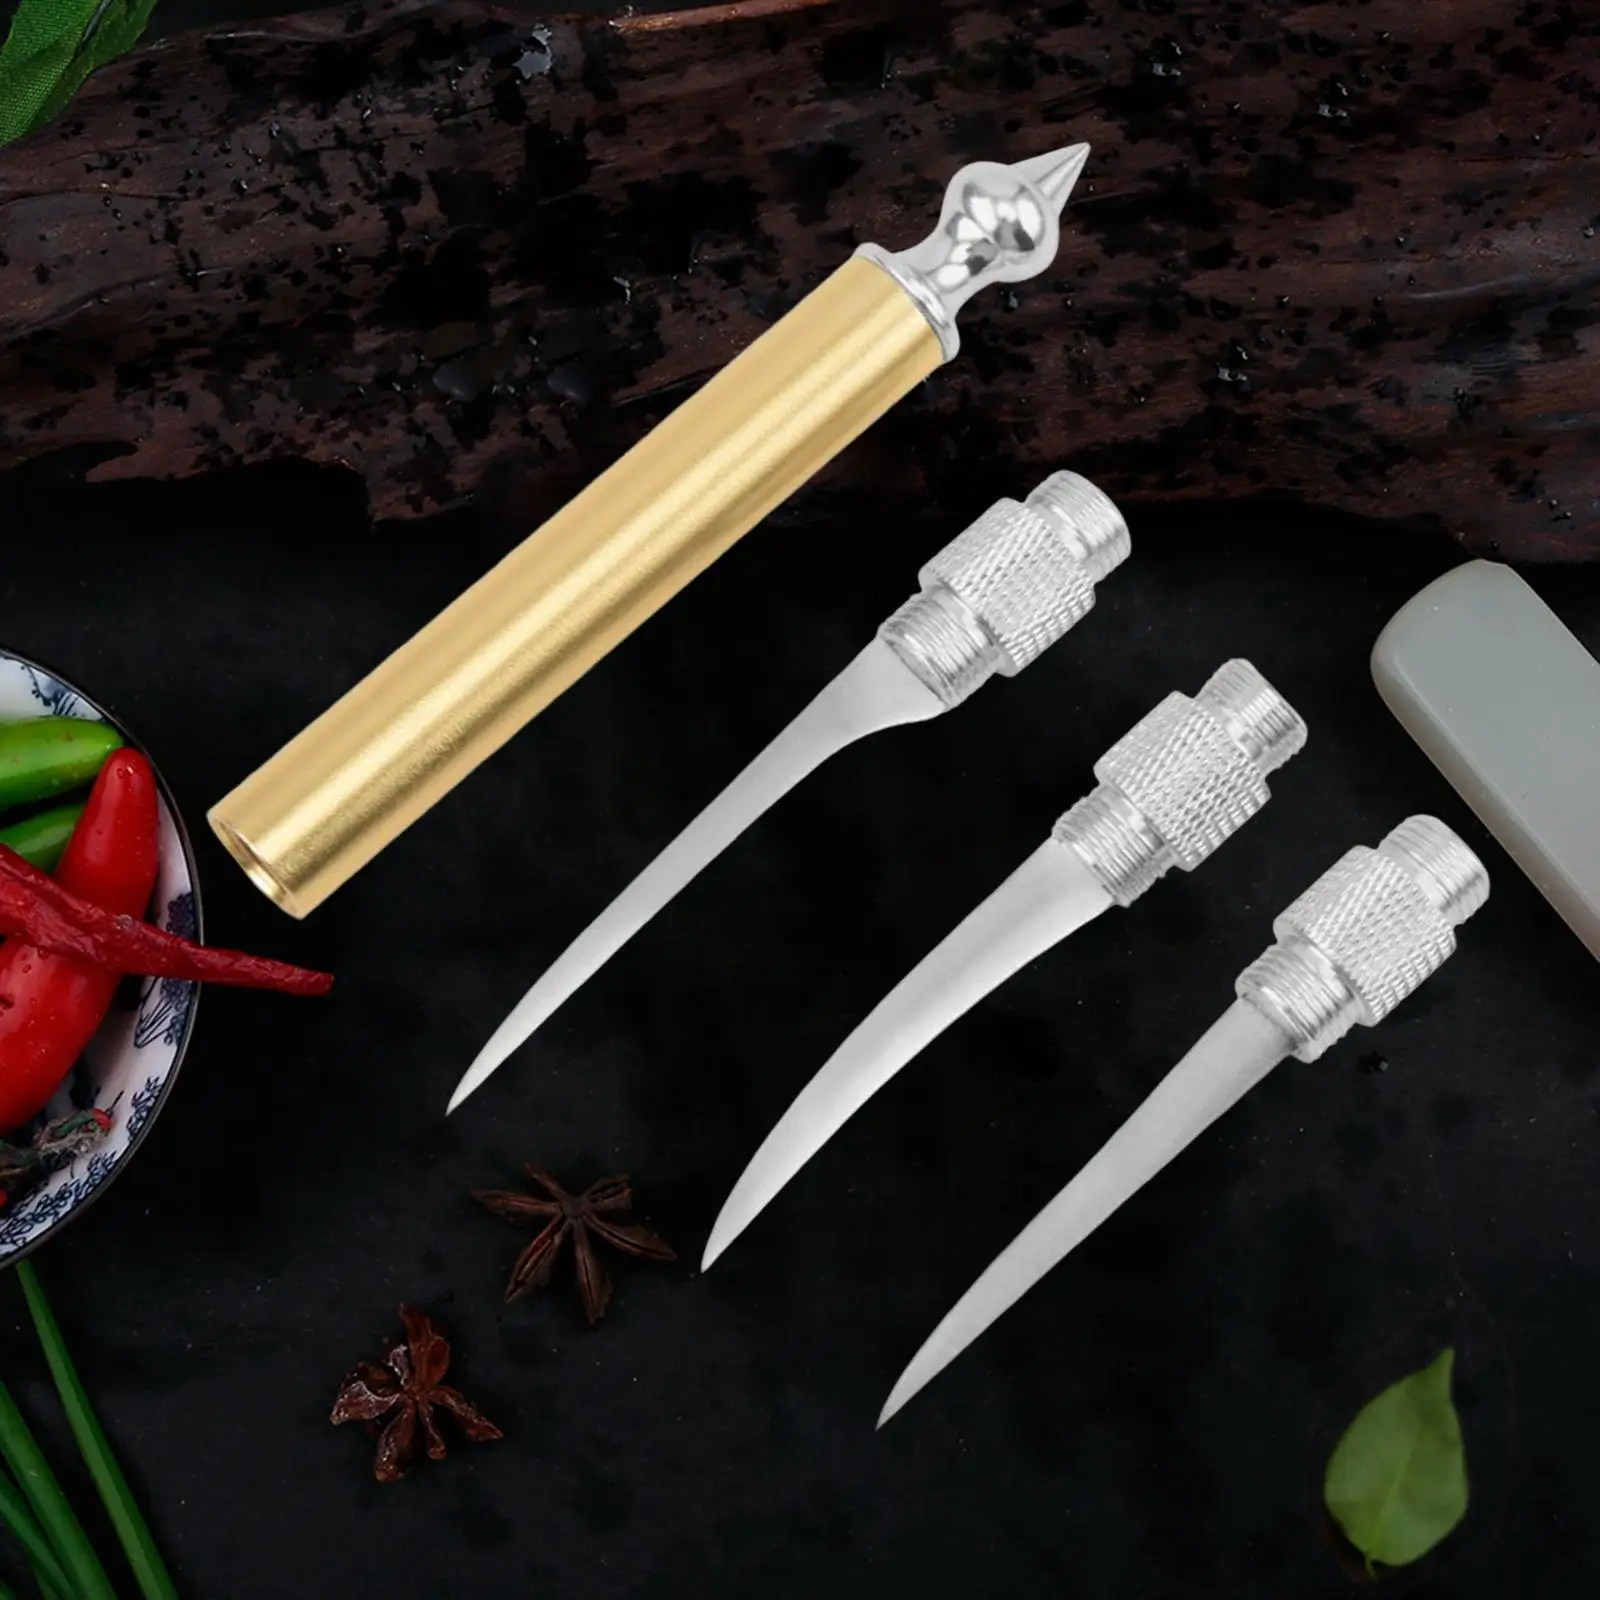 Fruit Carving Tool Set Stainless Steel culinary Engraving Modeling Chef